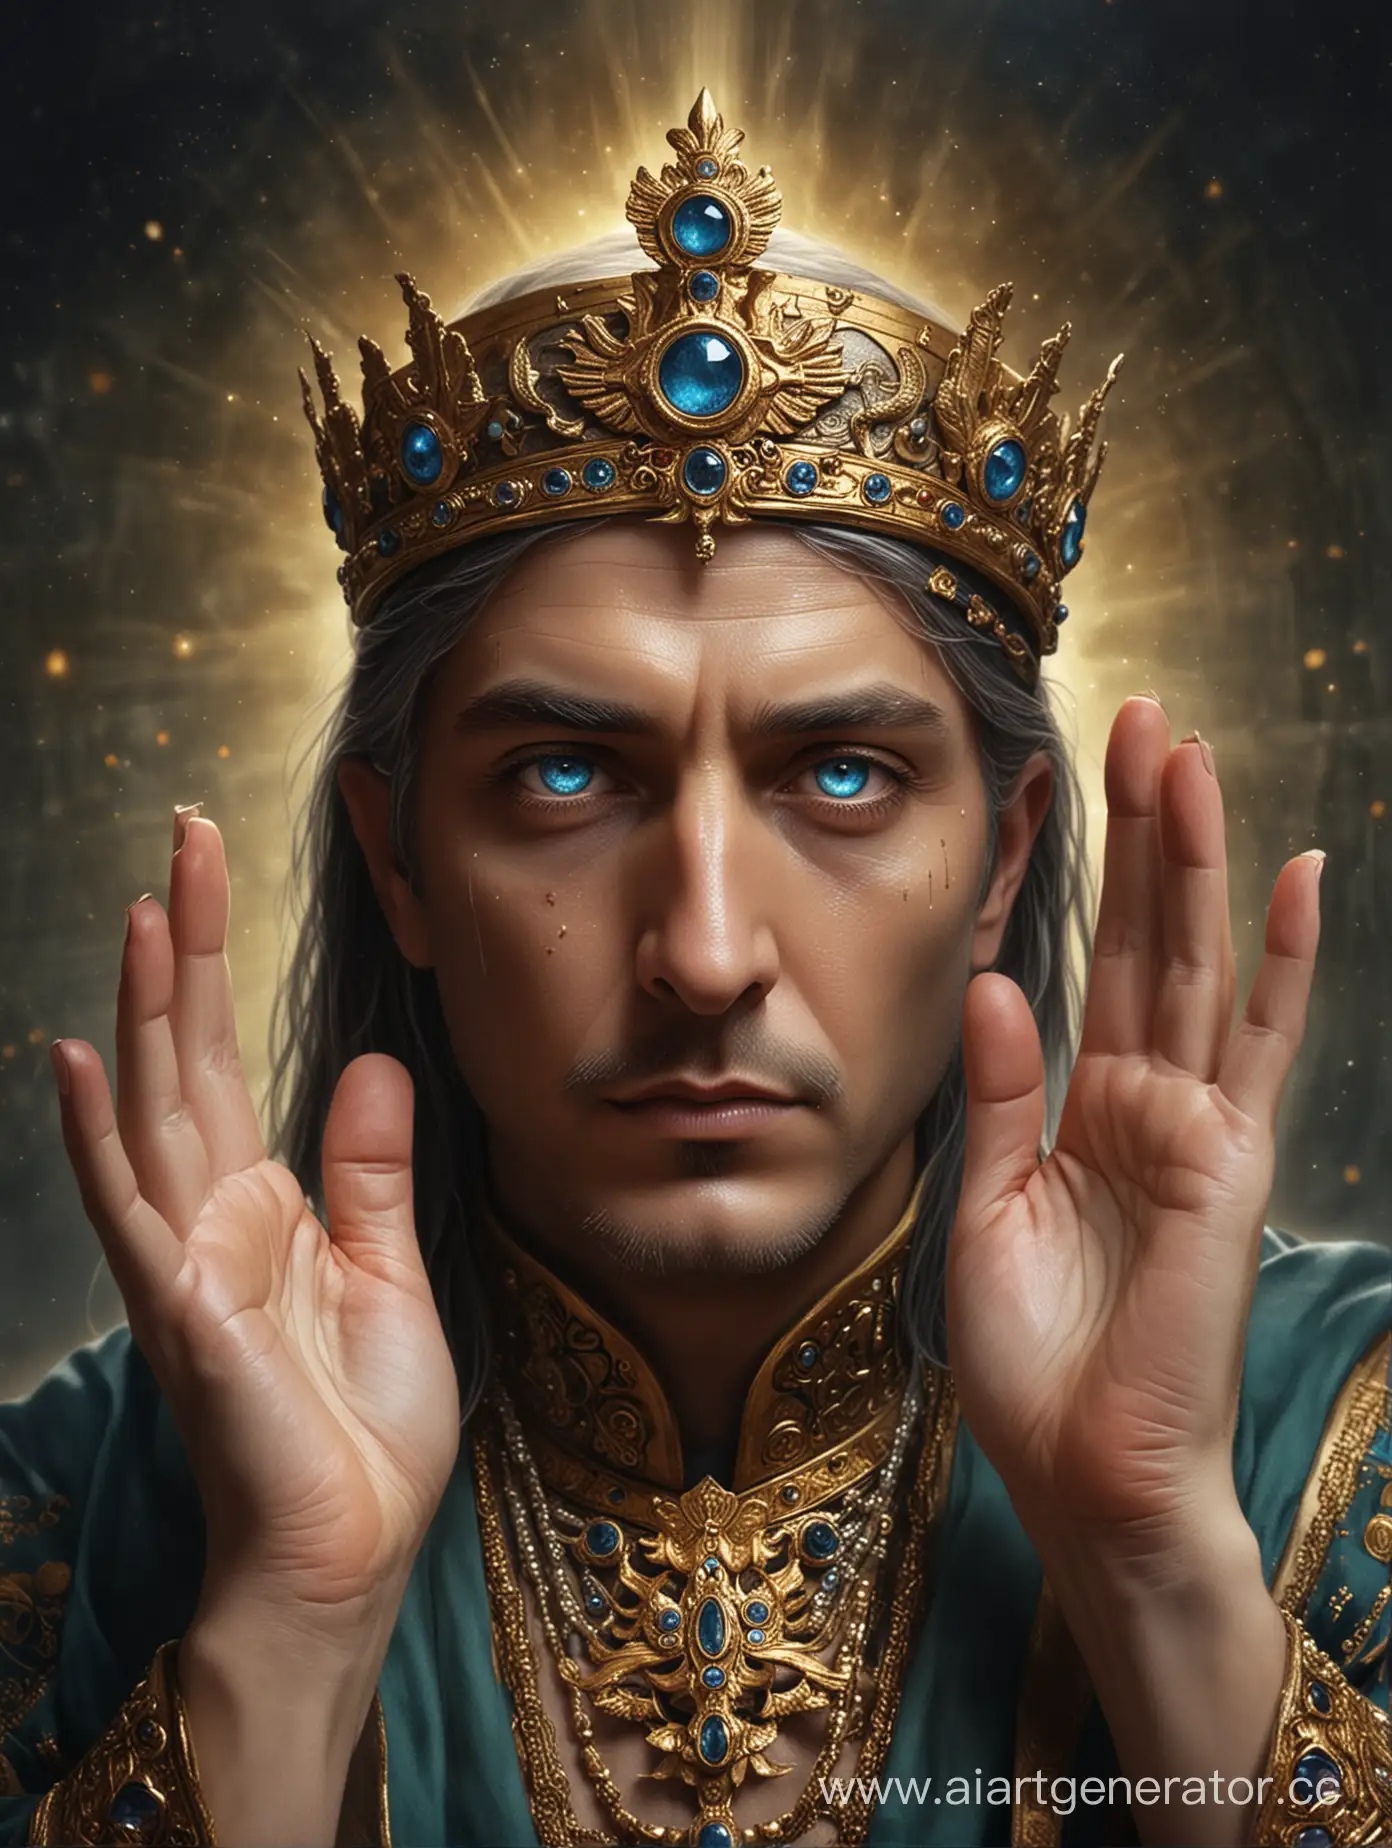 Majestic-Emperor-with-AllSeeing-Eyes-and-Powerful-Hands